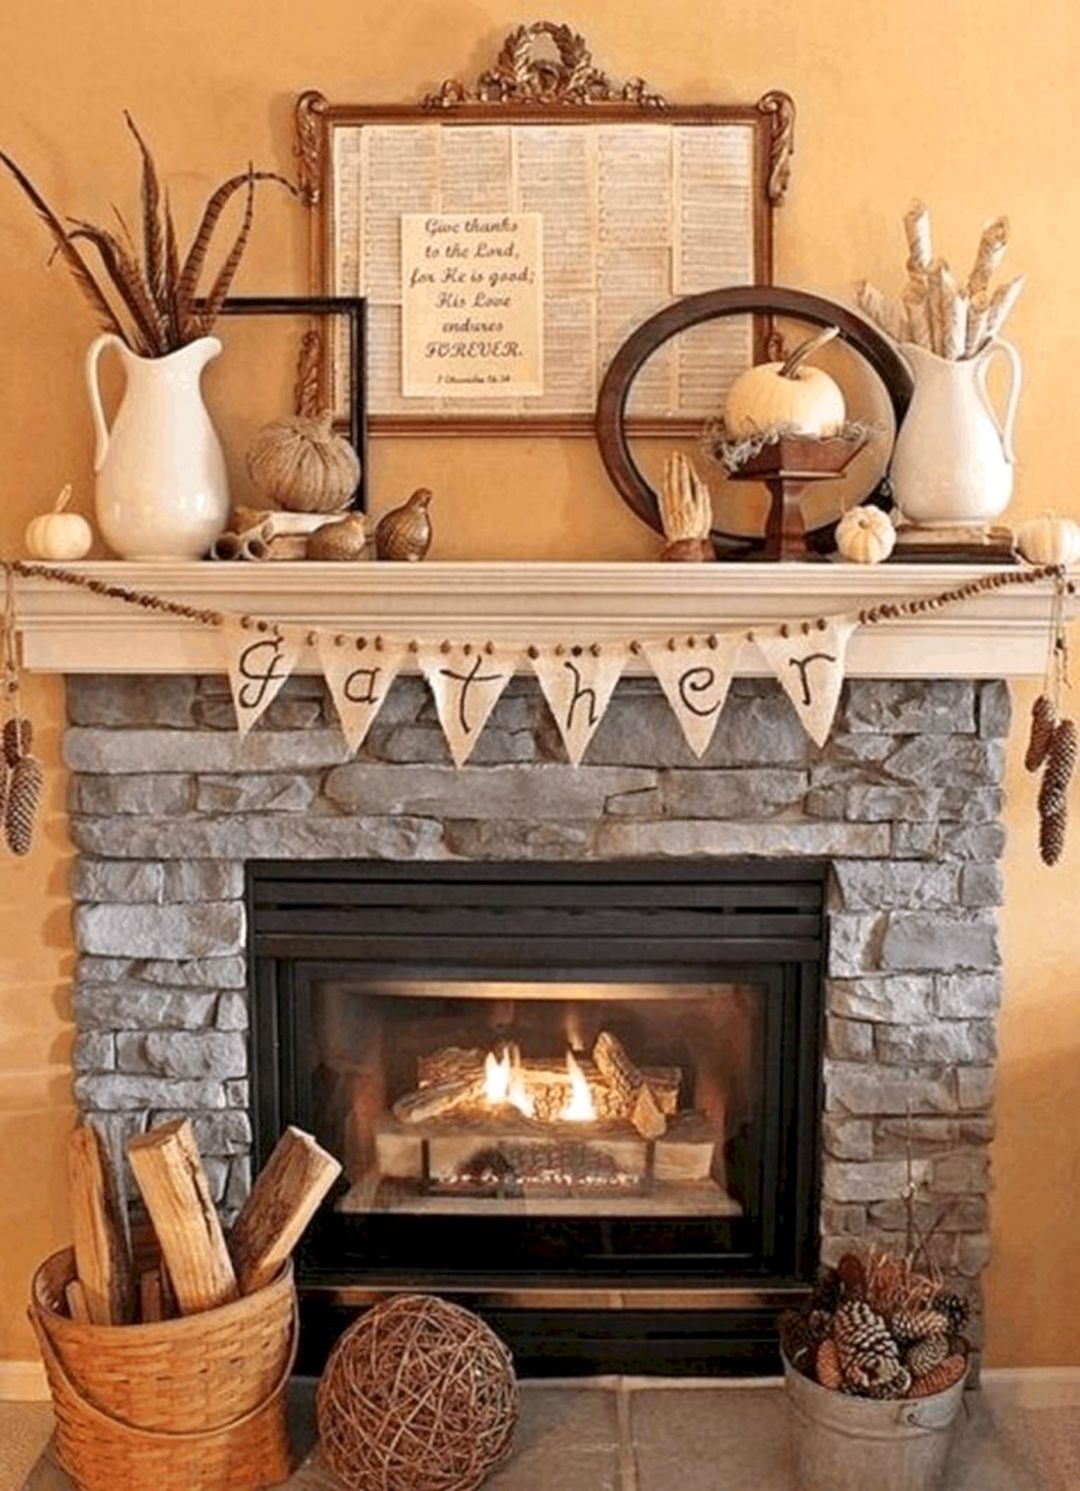 Beautiful fall decor ideas for your fireplace mantle